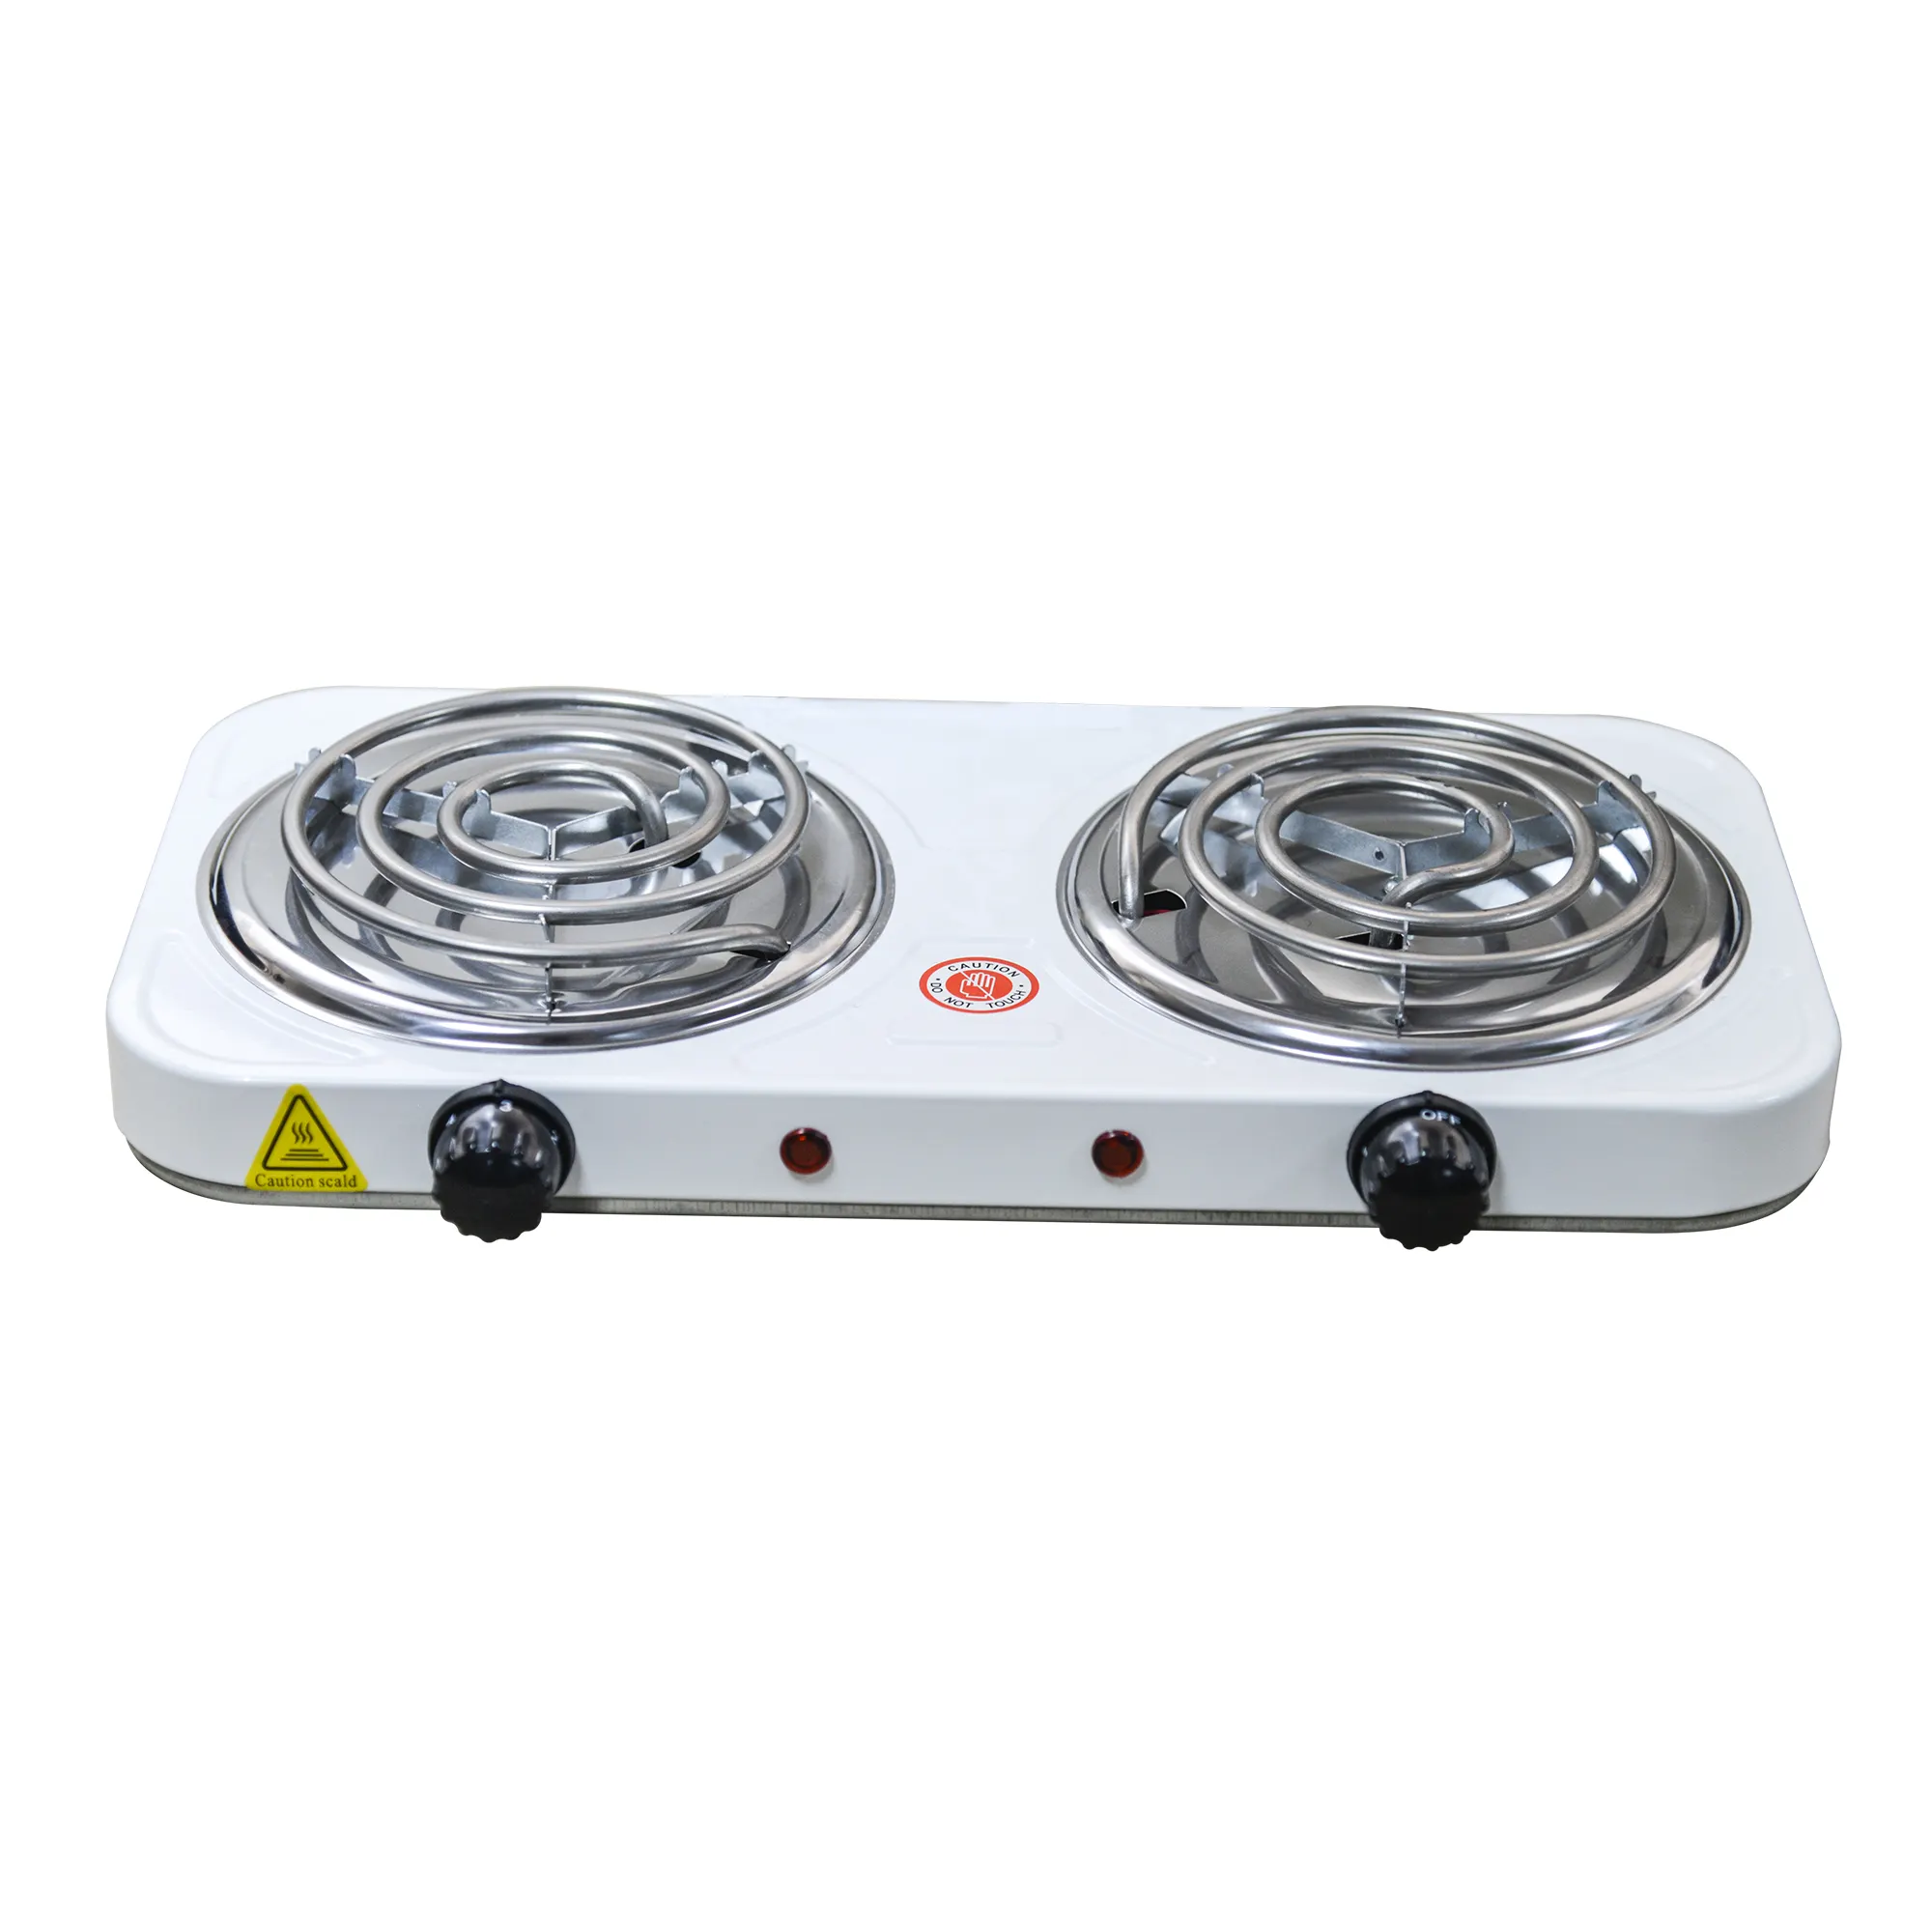 2 Plate Electric Stove Hot Plate Portable Dual Induction Electric Stove 2 Burner Electric Cooktop